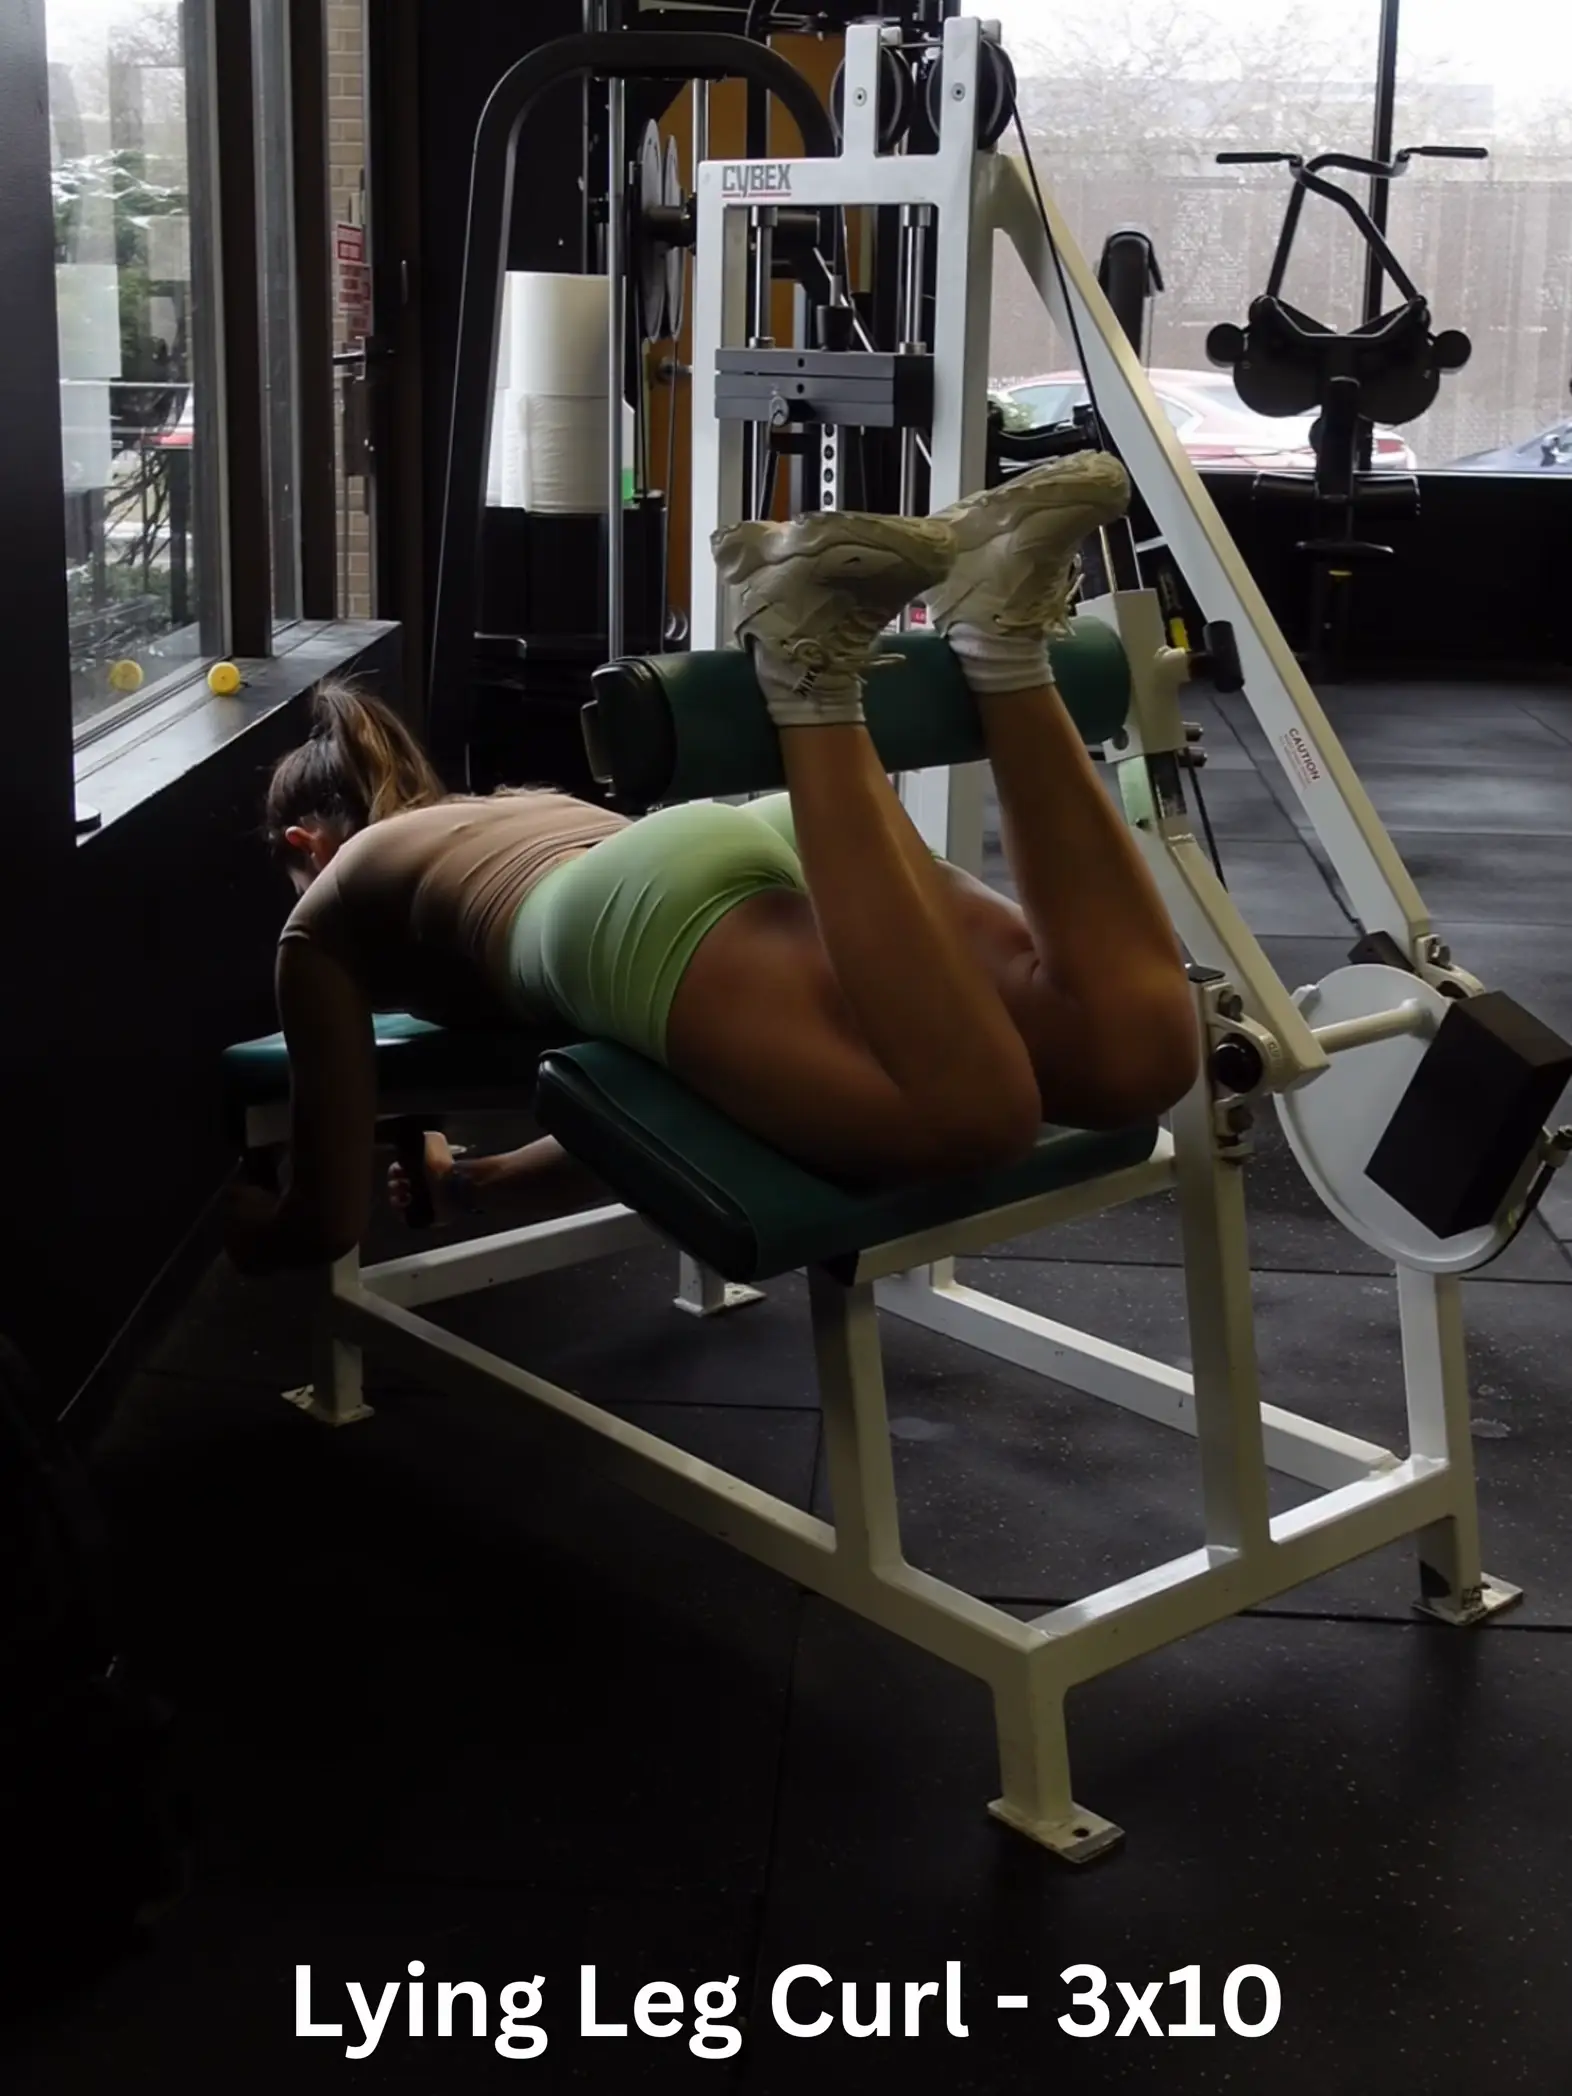 Quad & Glute Workout Routine Details, Gallery posted by Leeney